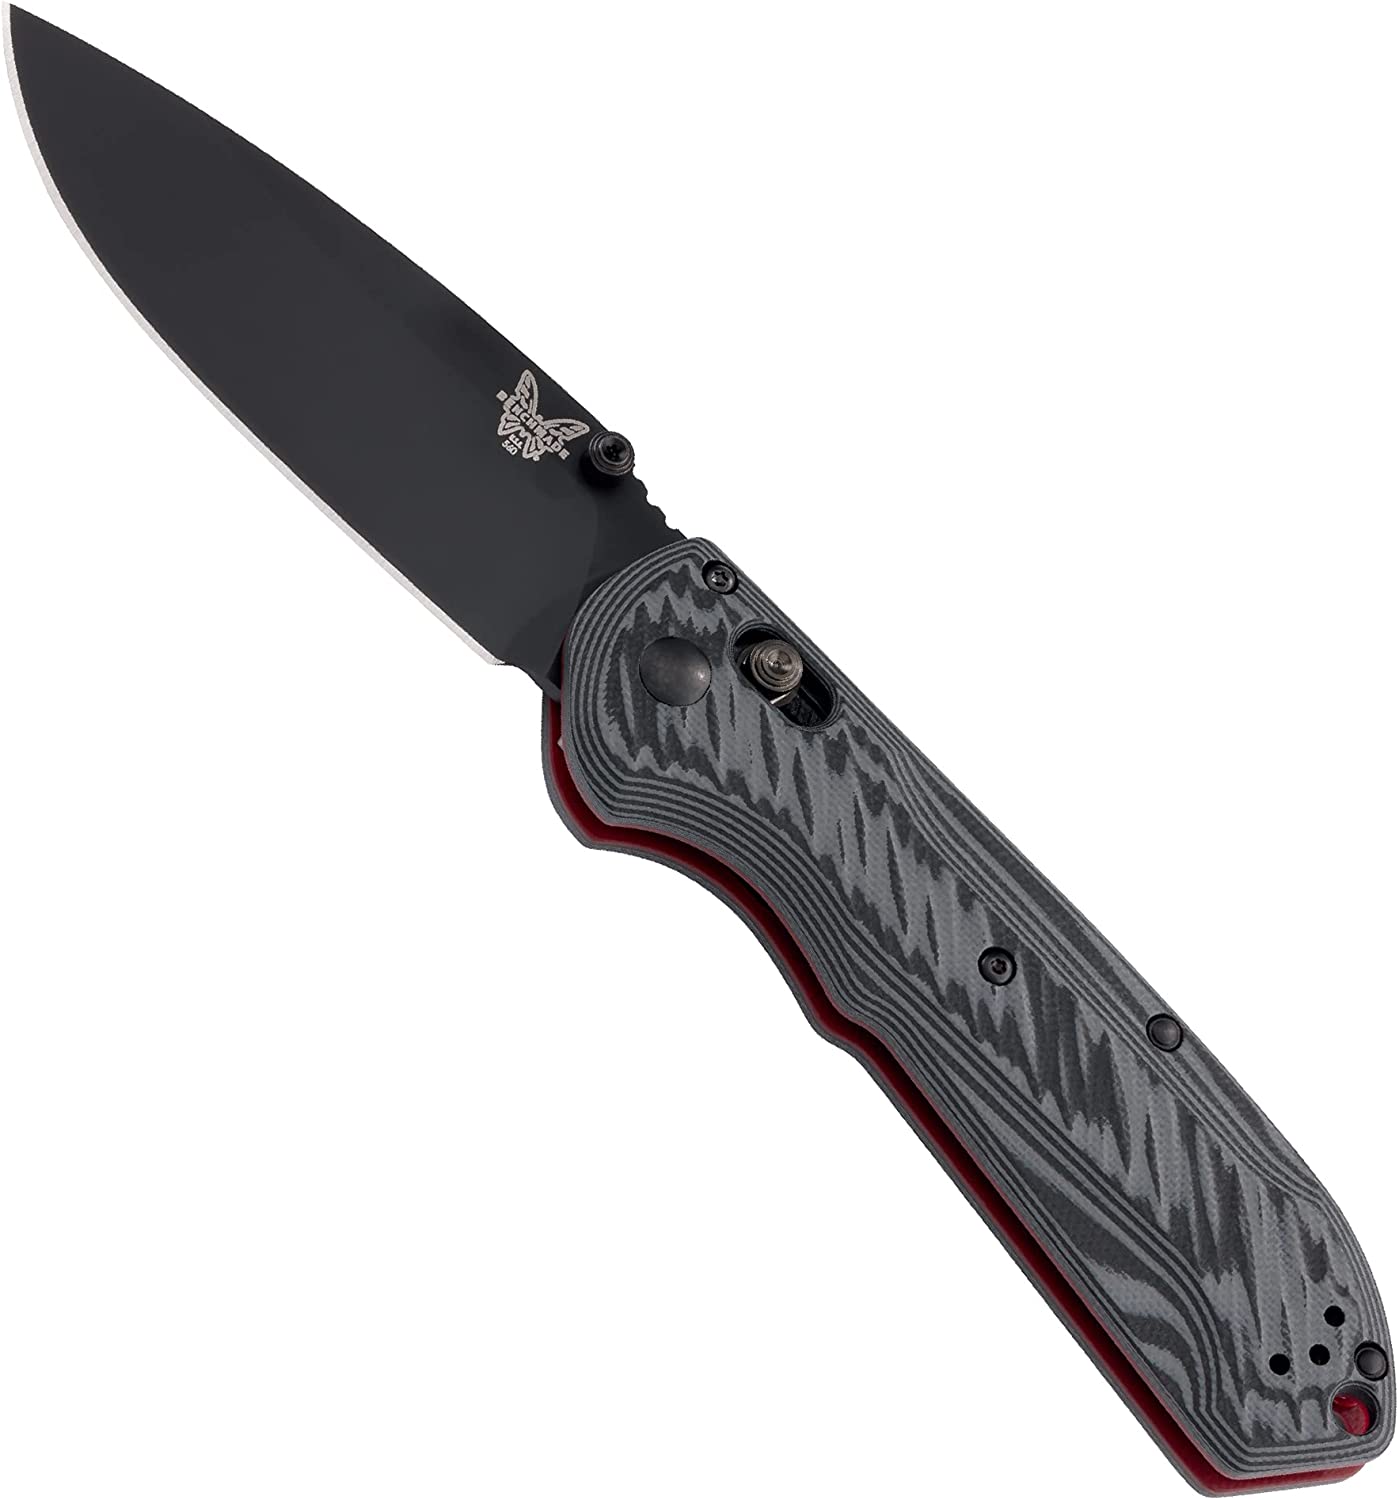 Benchmade 560BK-1 – Freek 560-1, EDC Folding Knife, Drop-Point Blade, Manual Open, Axis Locking Mechanism, Made in USA, Coated, Straight, Gray/Black